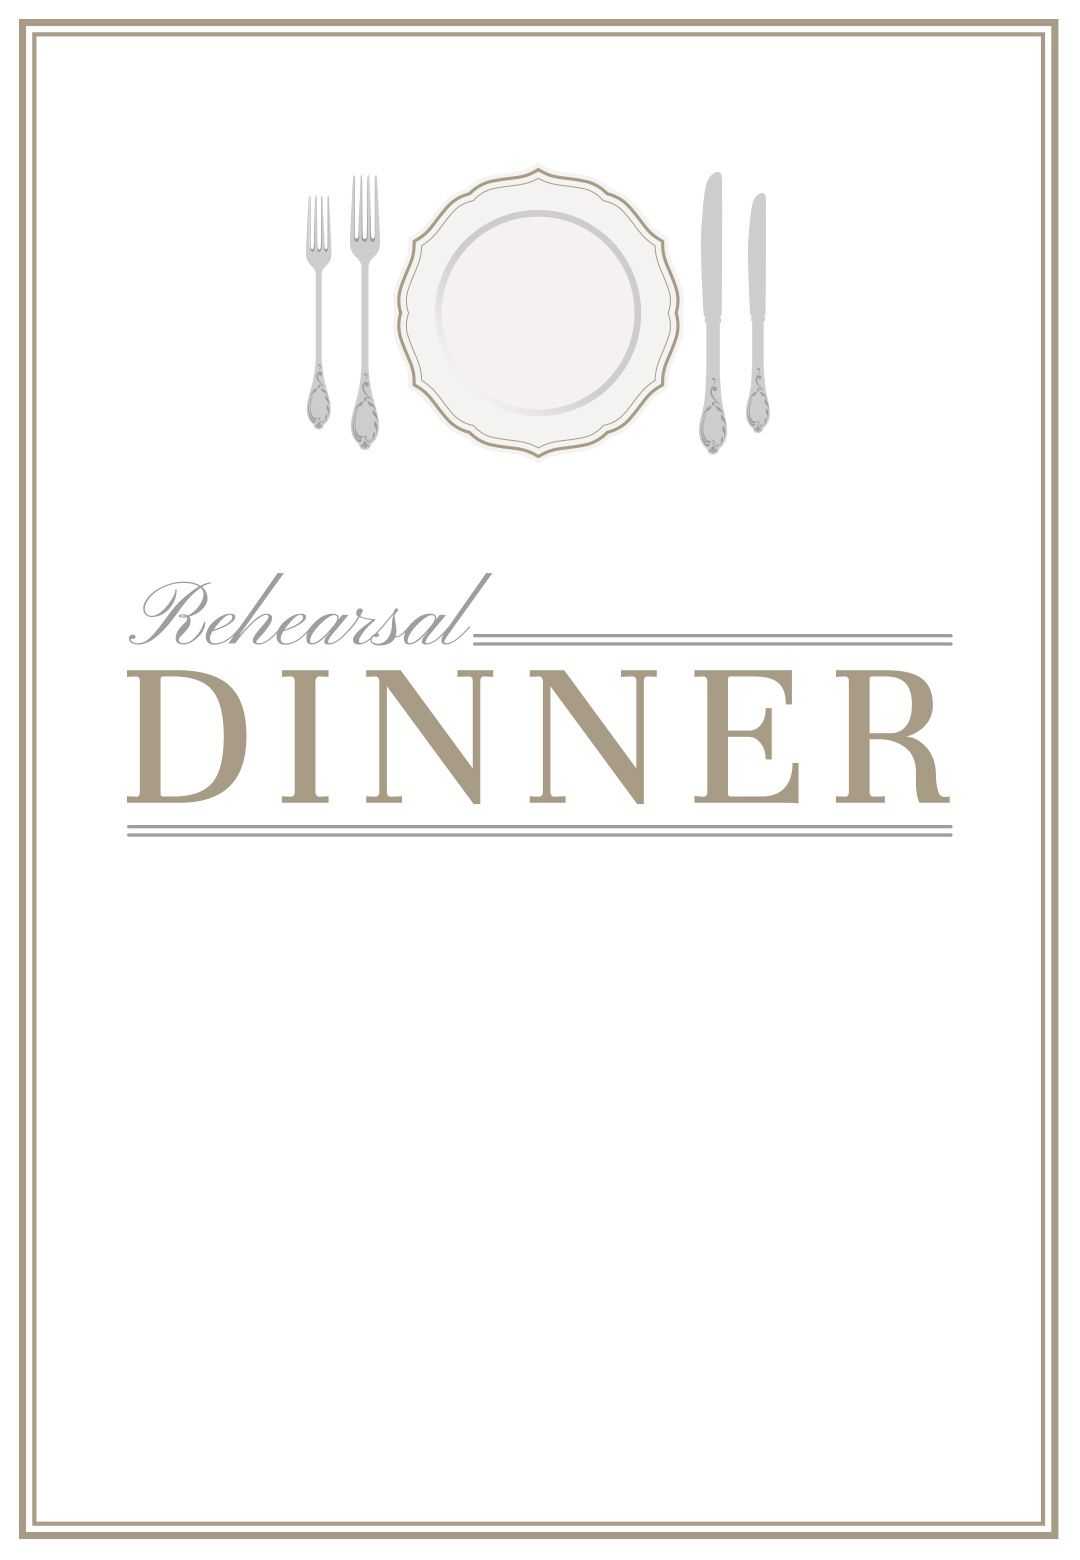 Elegant Setting - Free Printable Rehearsal Dinner Party Pertaining To Free Dinner Invitation Templates For Word